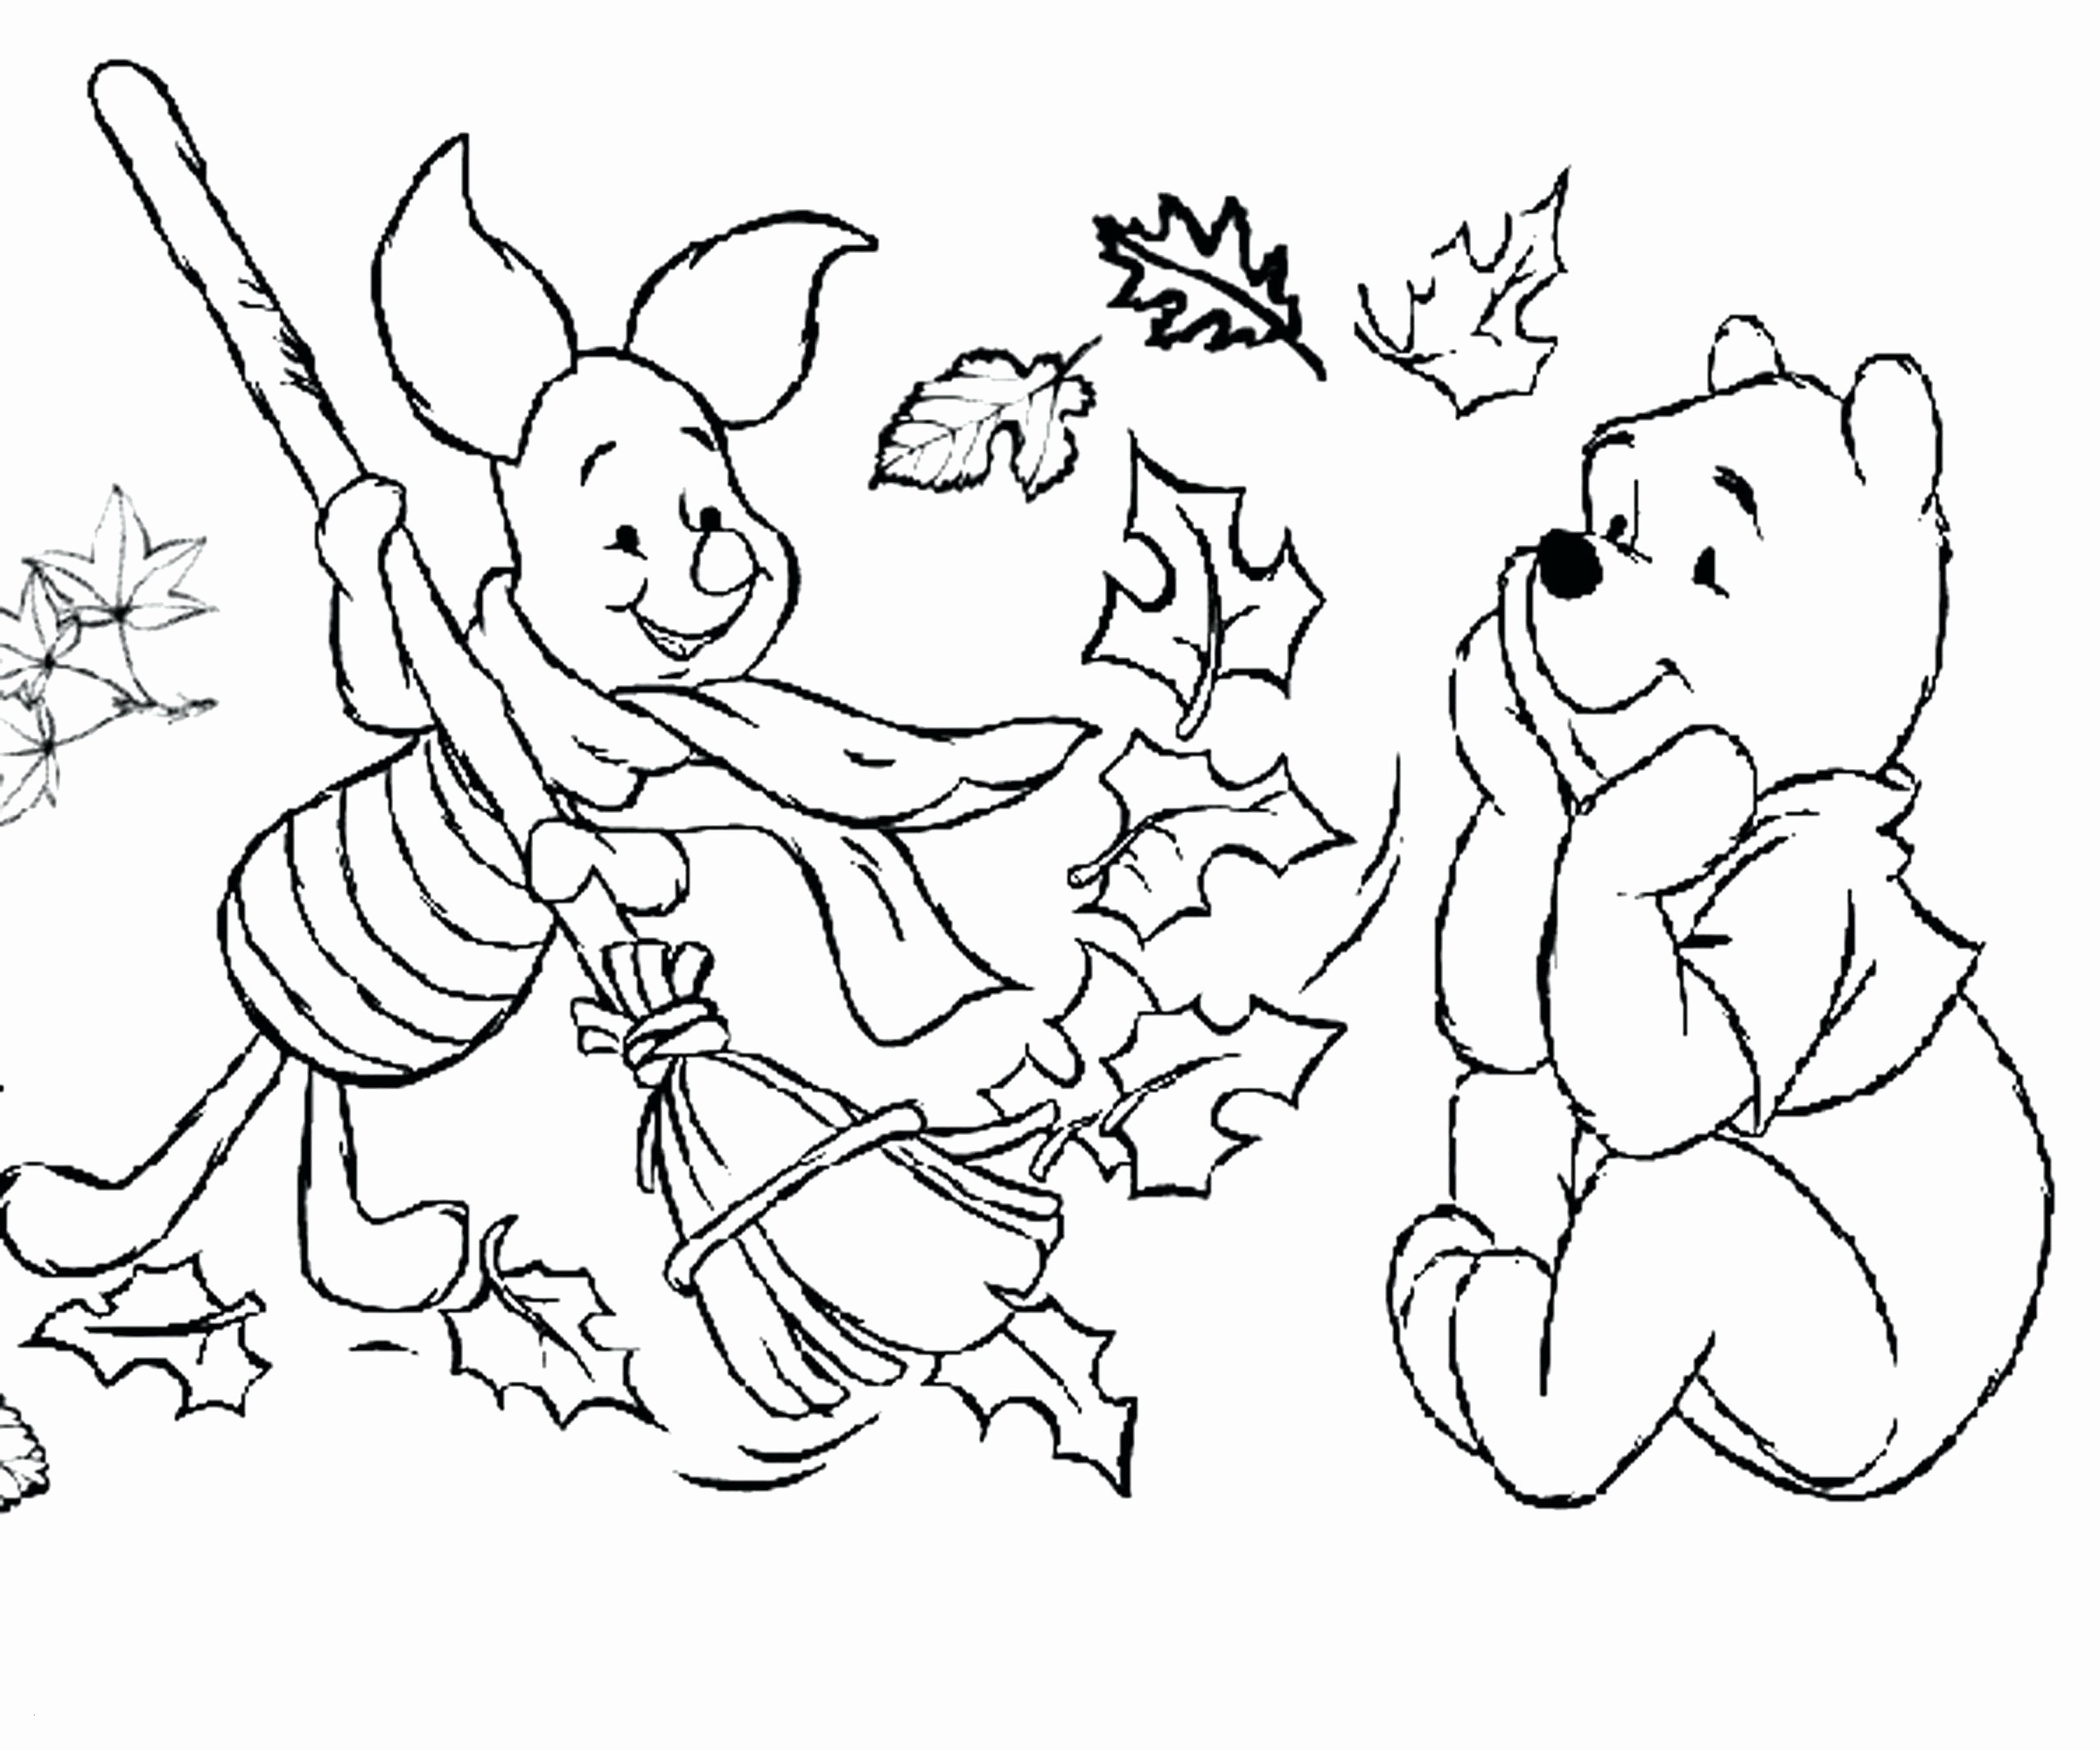 Save The Earth Coloring Pages Save The Earth Coloring Pages Elegant Coloring Pages Of Save